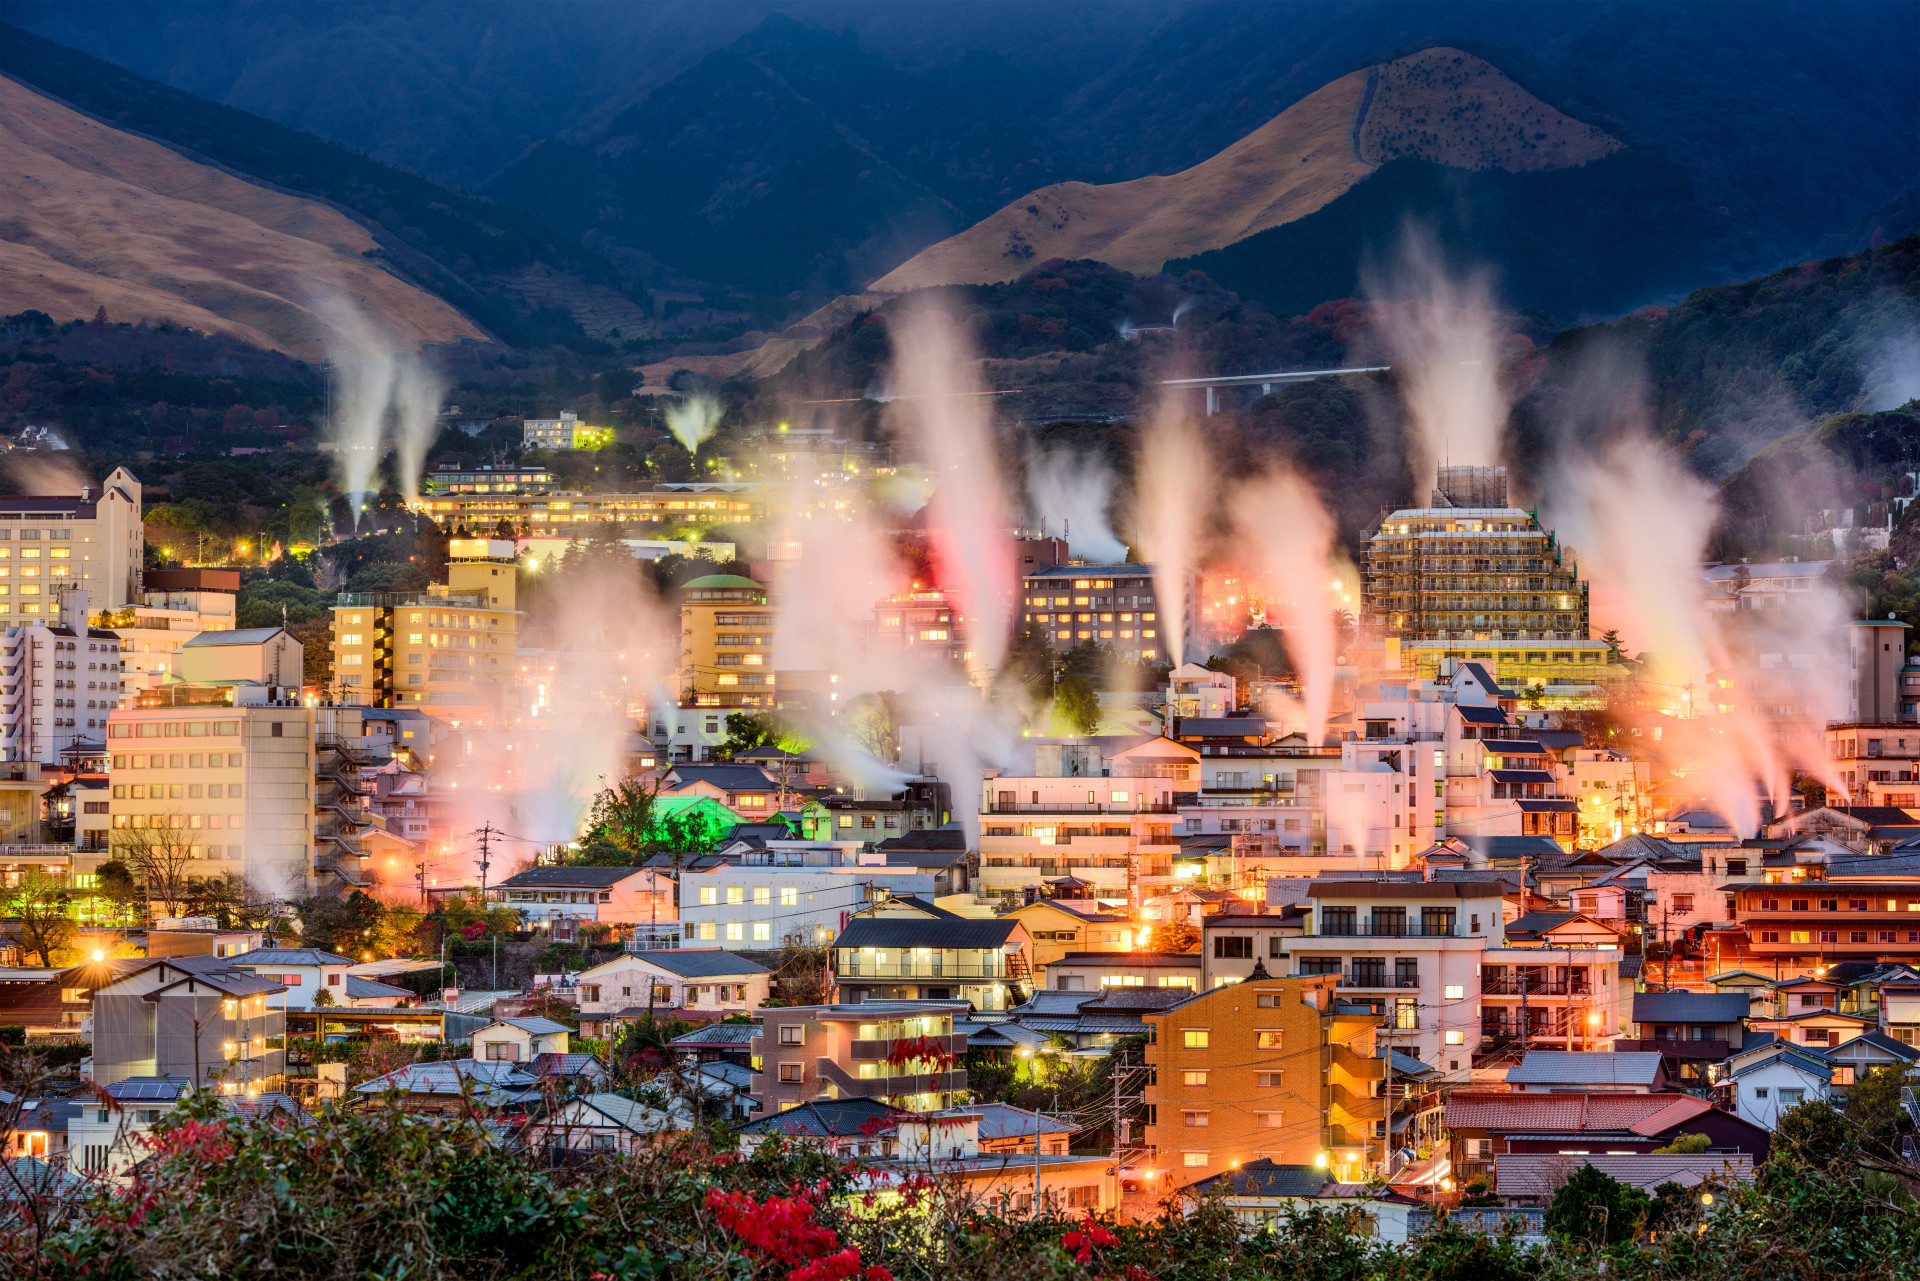 The hot steam that rises from the ground and waters of Beppu make it look like hell lies beneath.